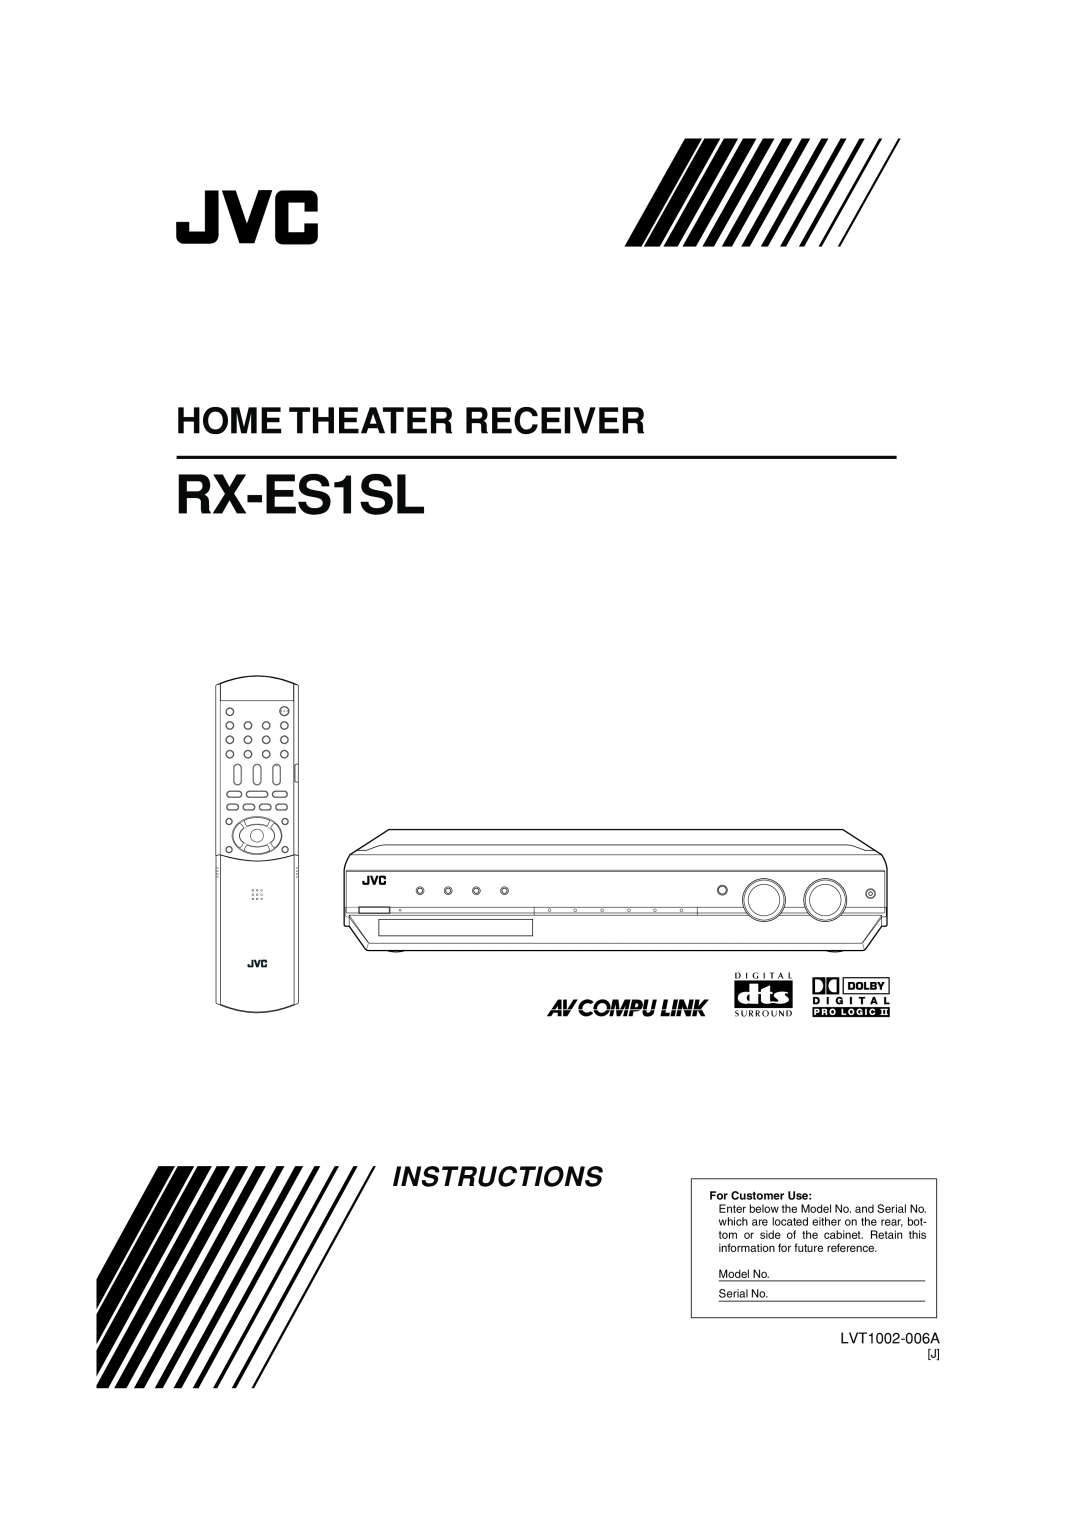 JVC RX-ES1SL manual Home Theater Receiver, Instructions, LVT1002-006A, For Customer Use, Model No Serial No 